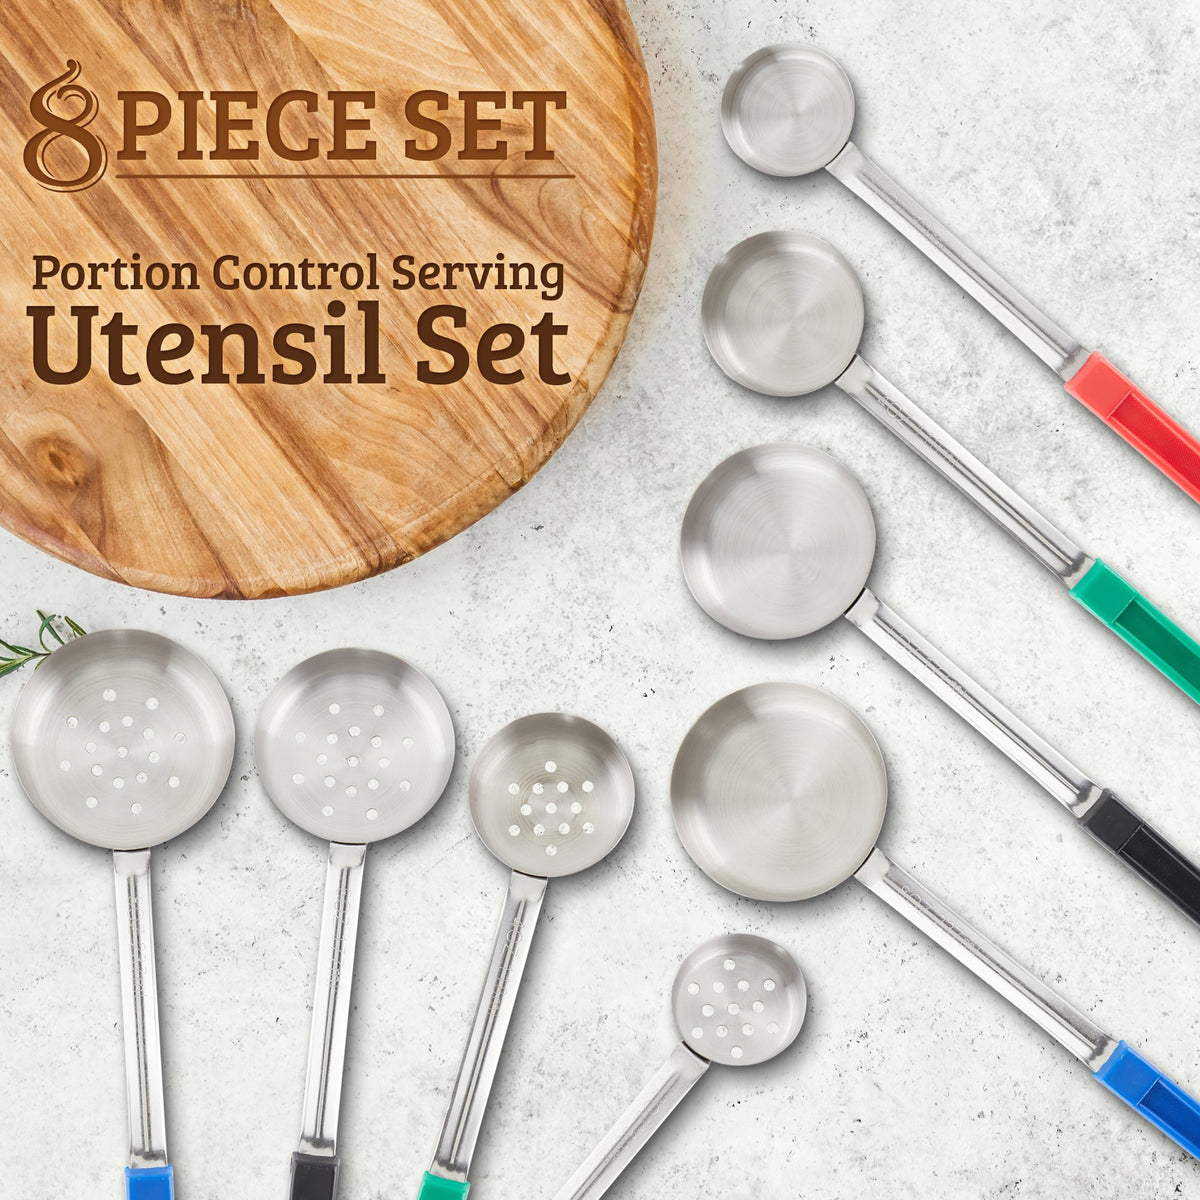 Portion Control Serving Utensil Set - Bariatric Surgery Must Haves - 8 Pack restaurant Serving Utensils - Gastric Sleeve, Weight Loss, Home Cooking, Bariatric Measuring - 4 Solid and Perforated